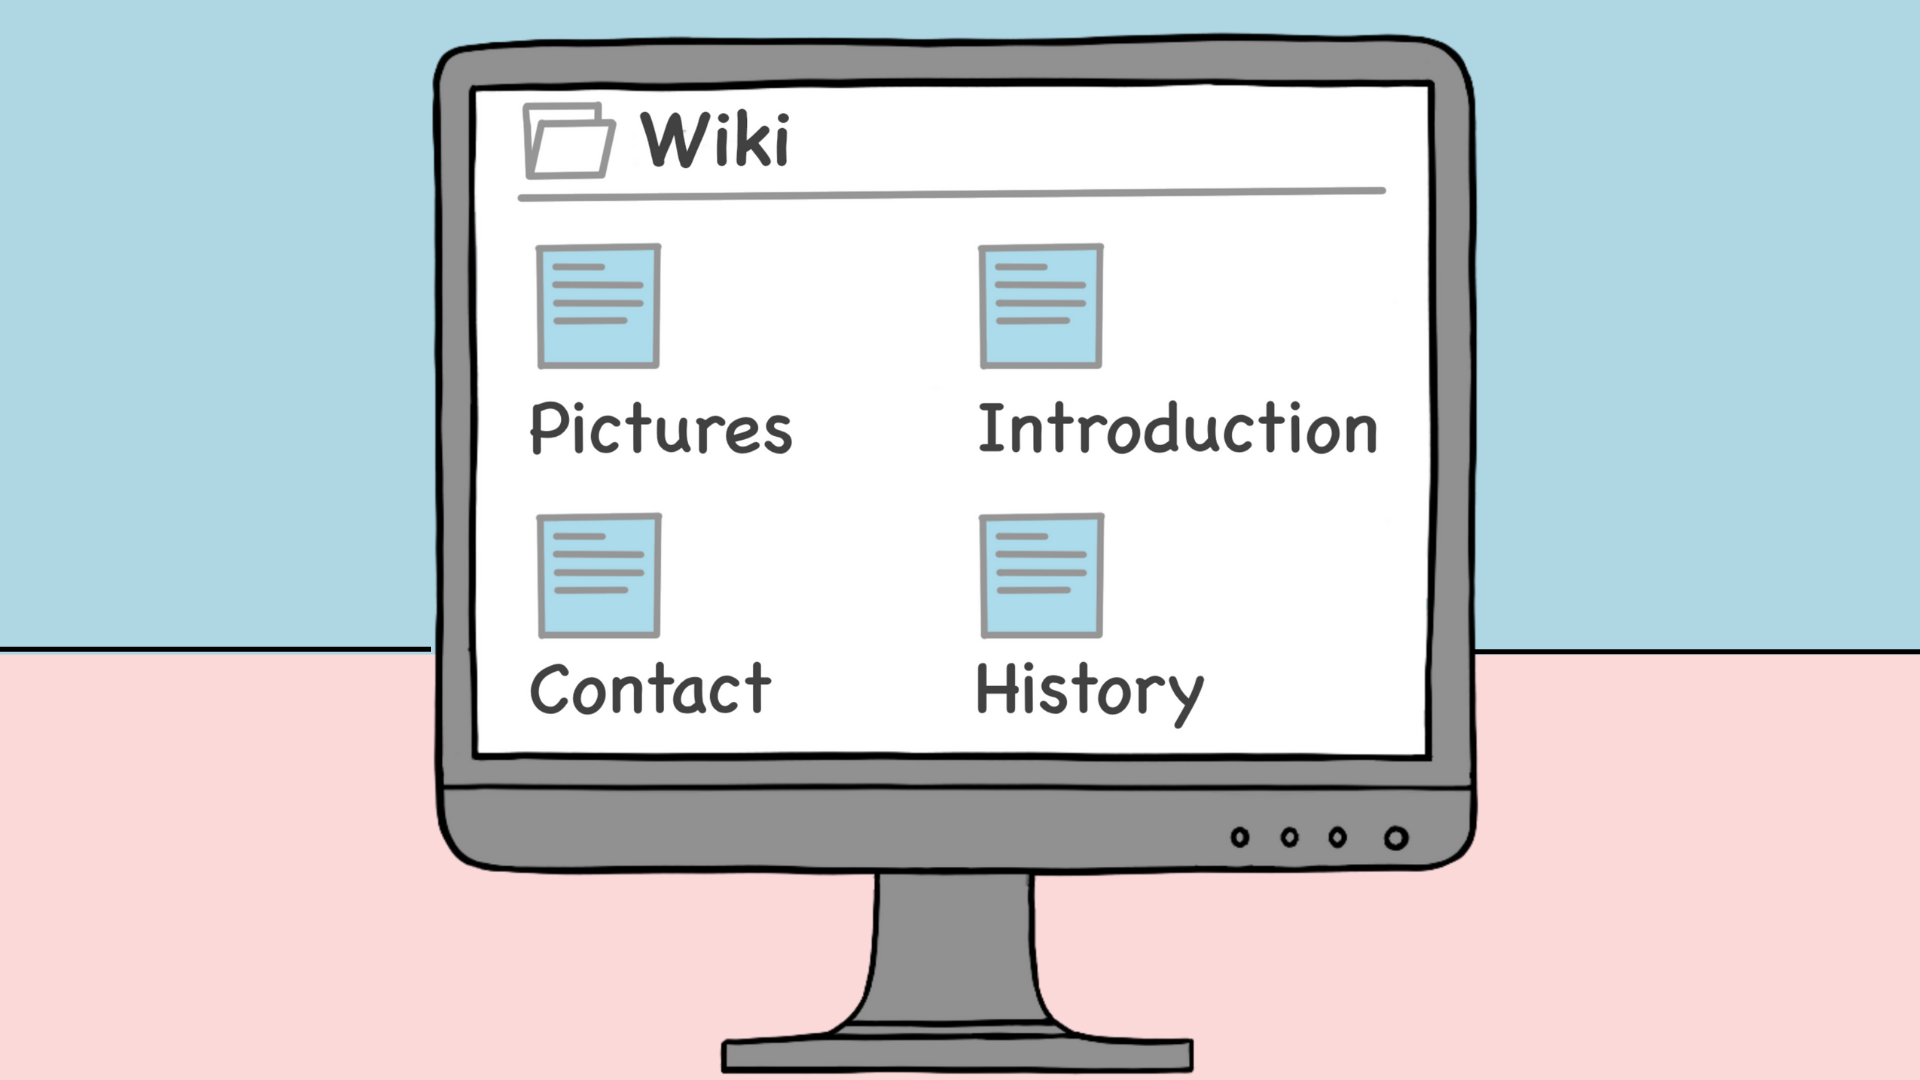 Your ultimate wiki handbook for project management on Sketchnote